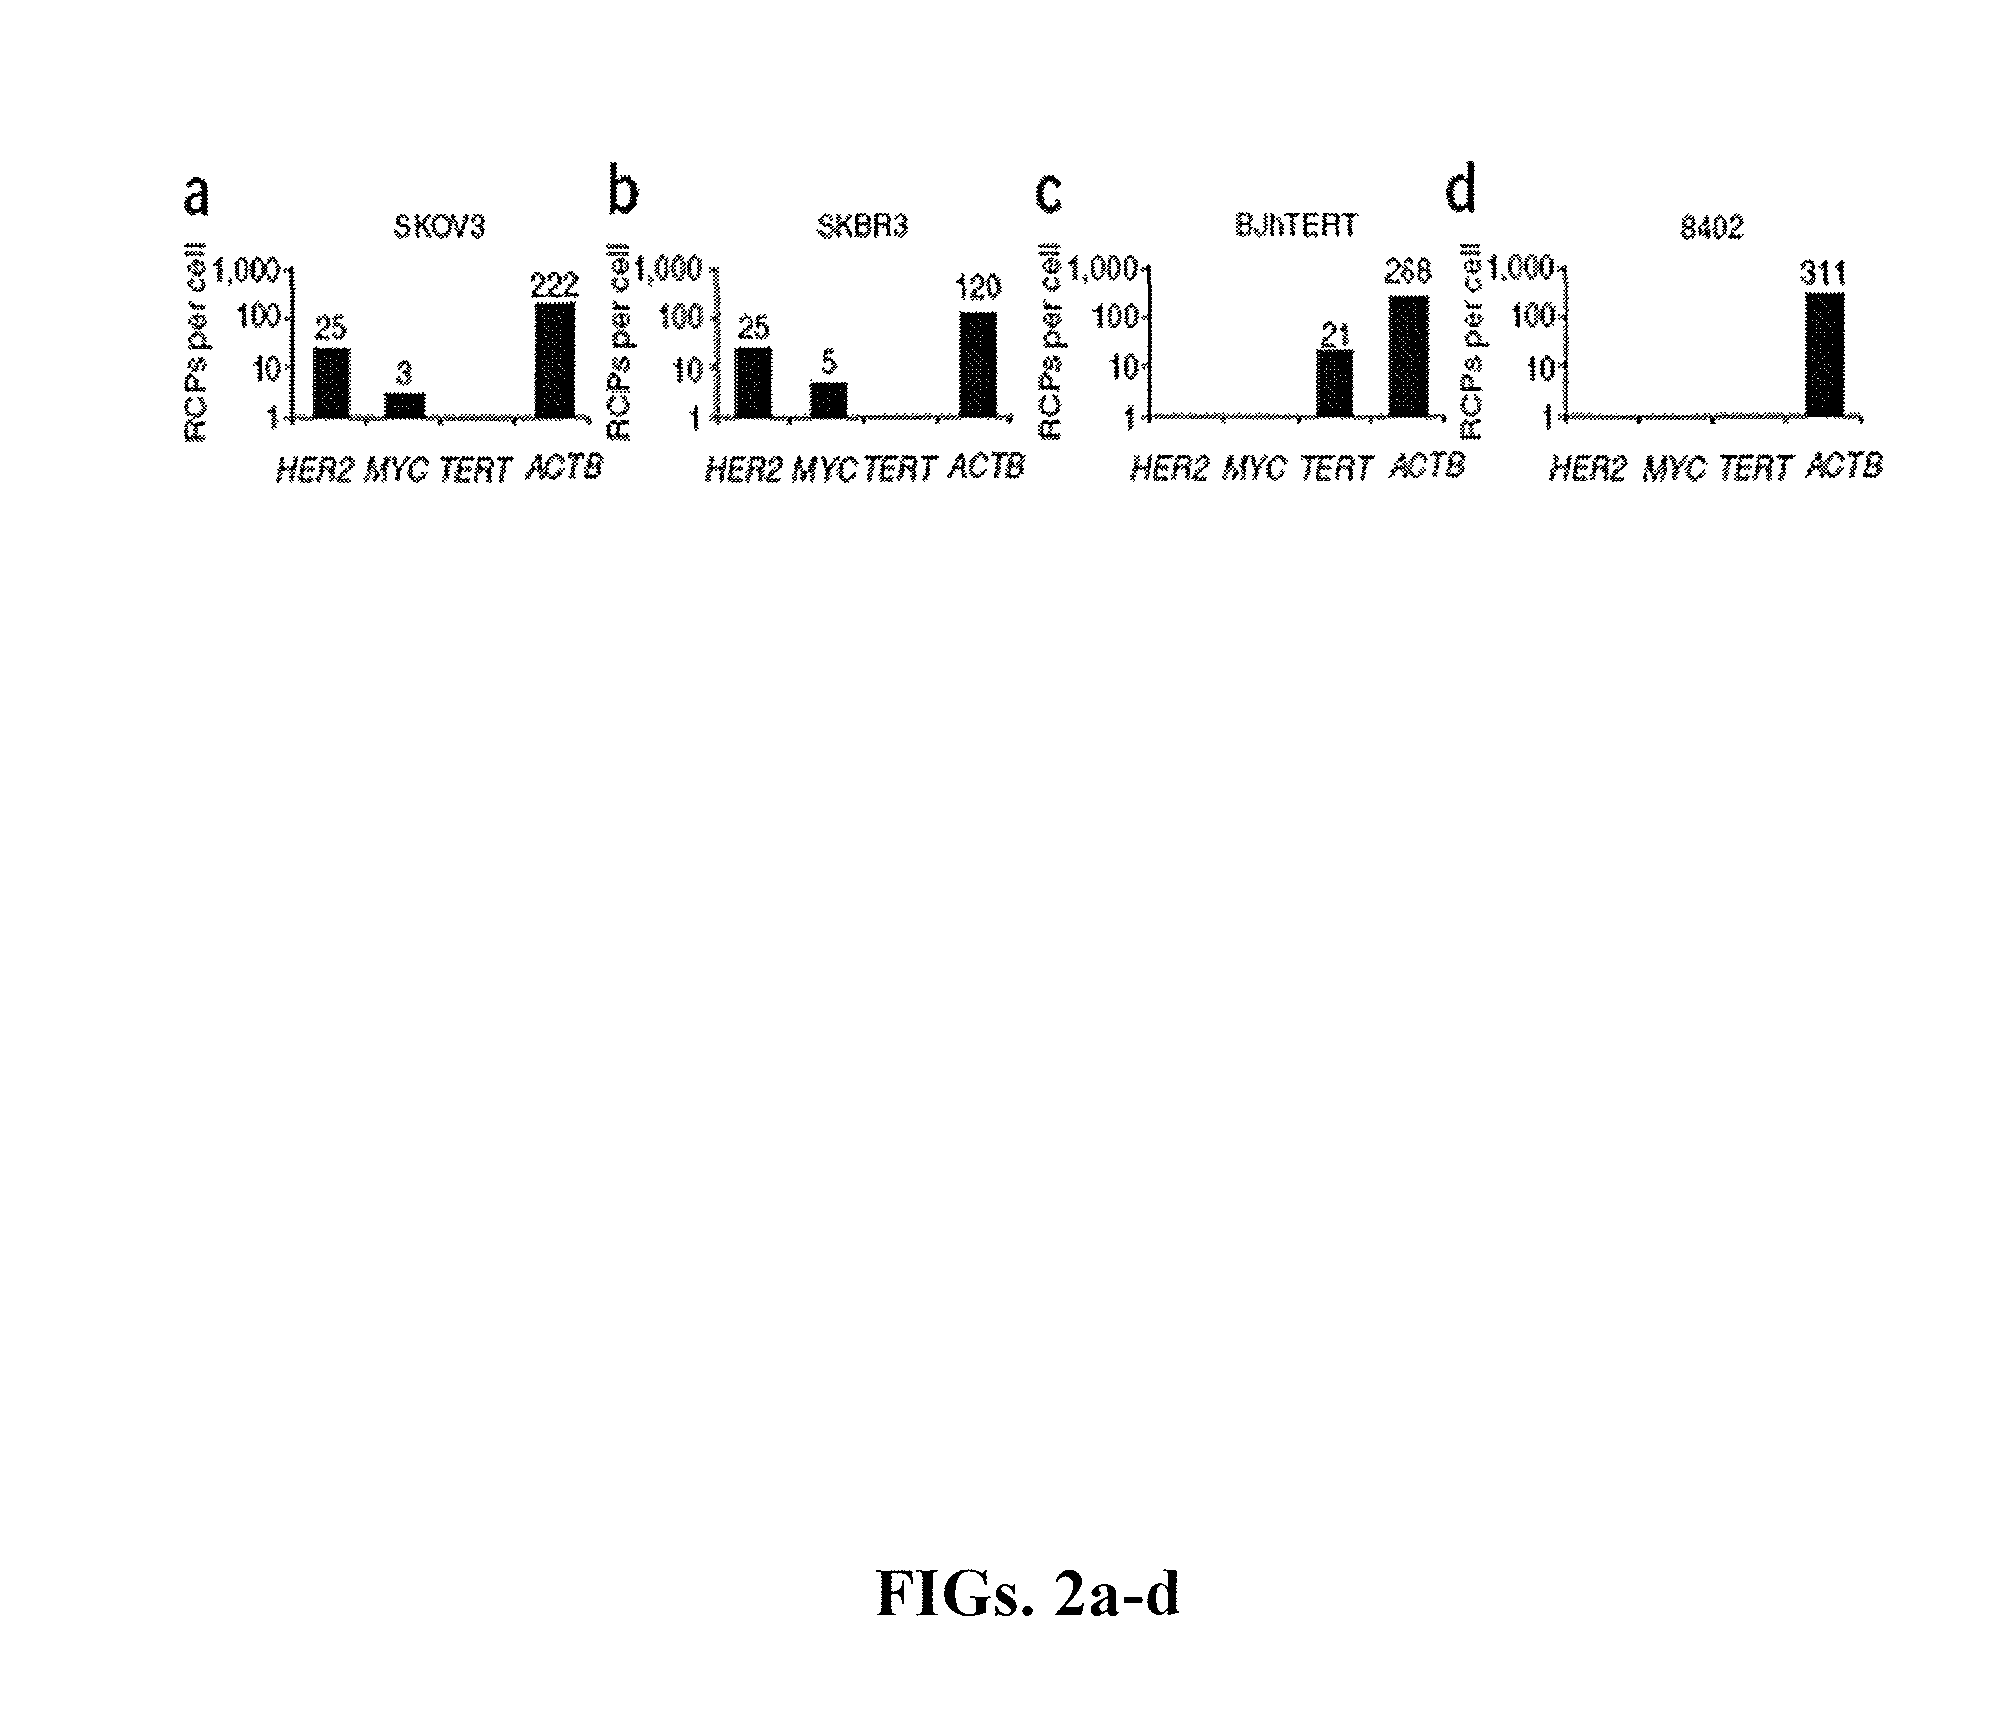 Methods for localized in situ detection of mRNA